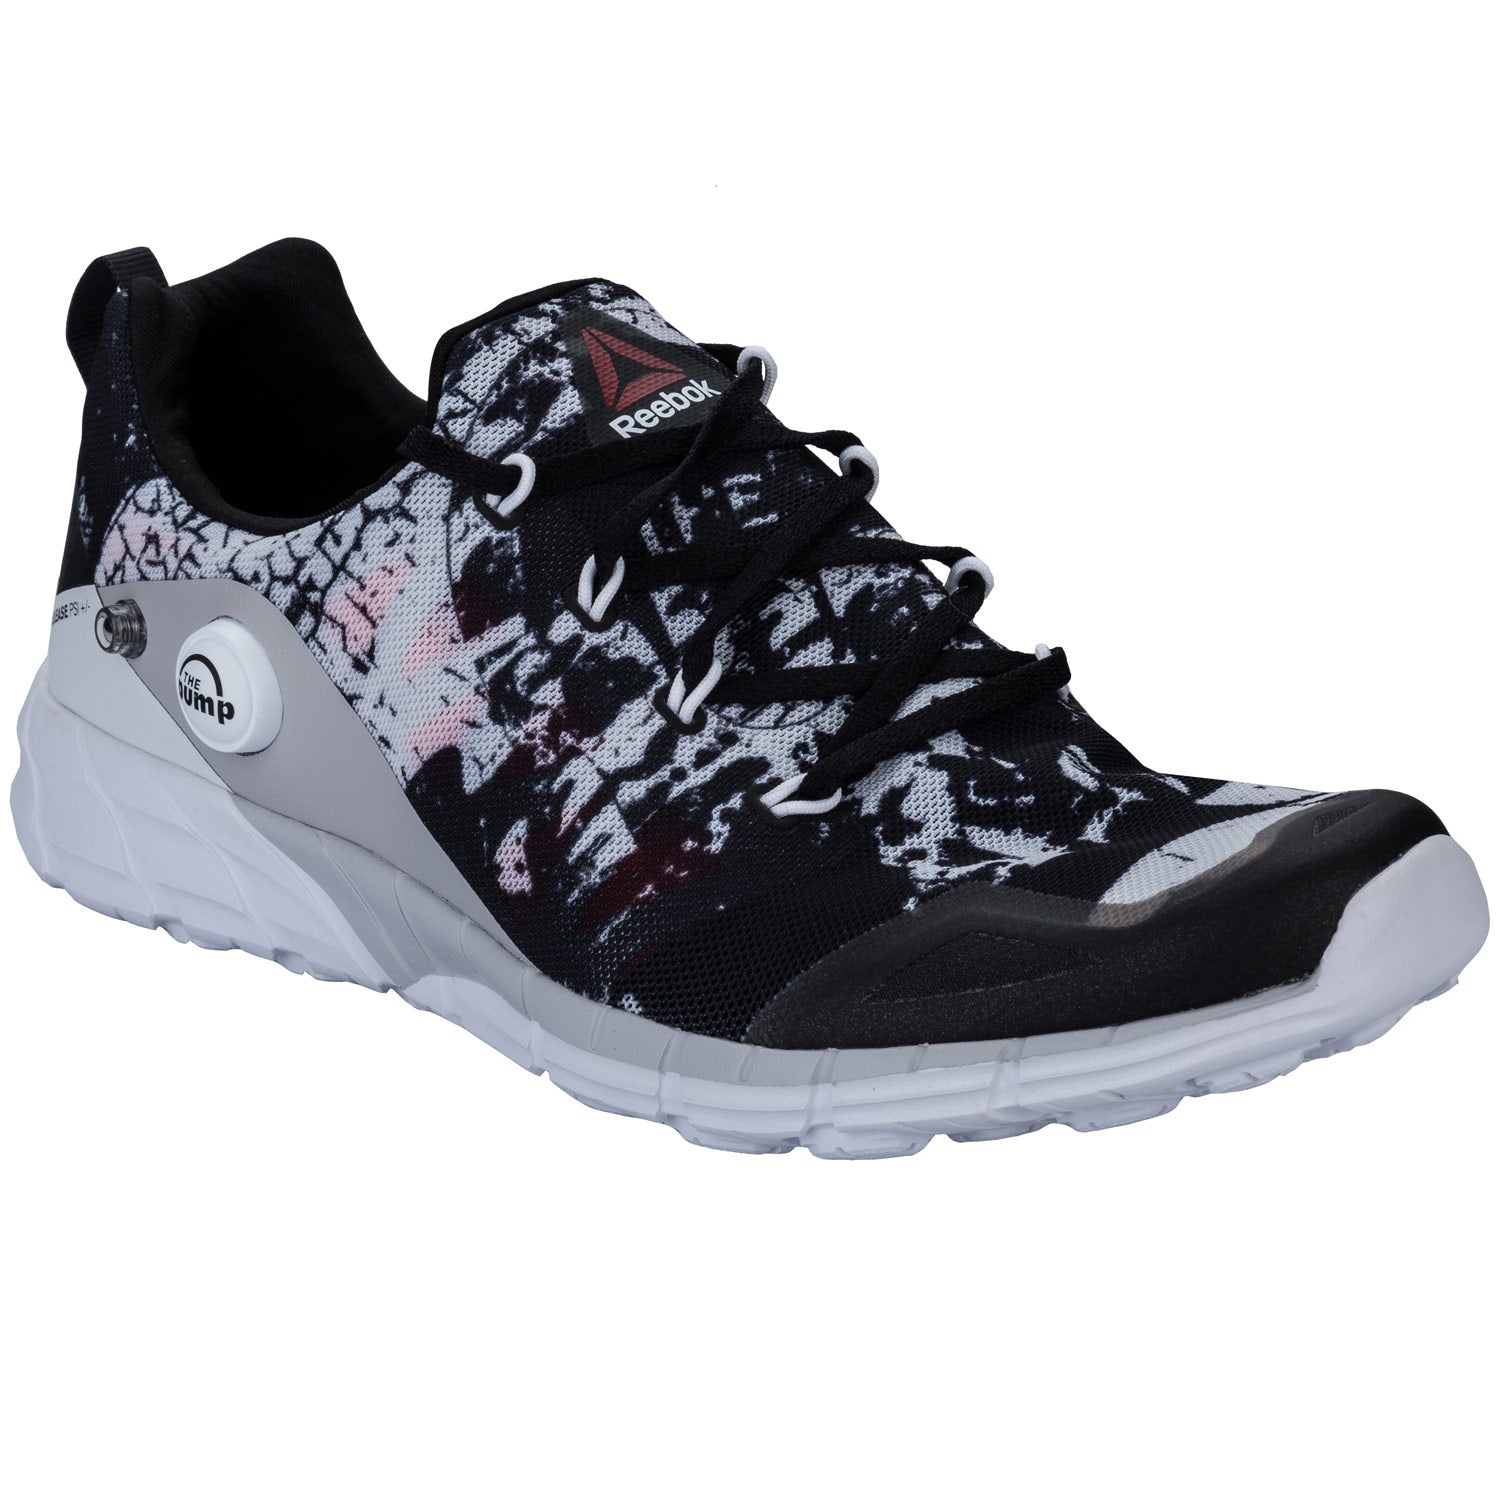 ZPUMP Fusion 2.0 Dunes Running shoes Trainers Smfashiontrends